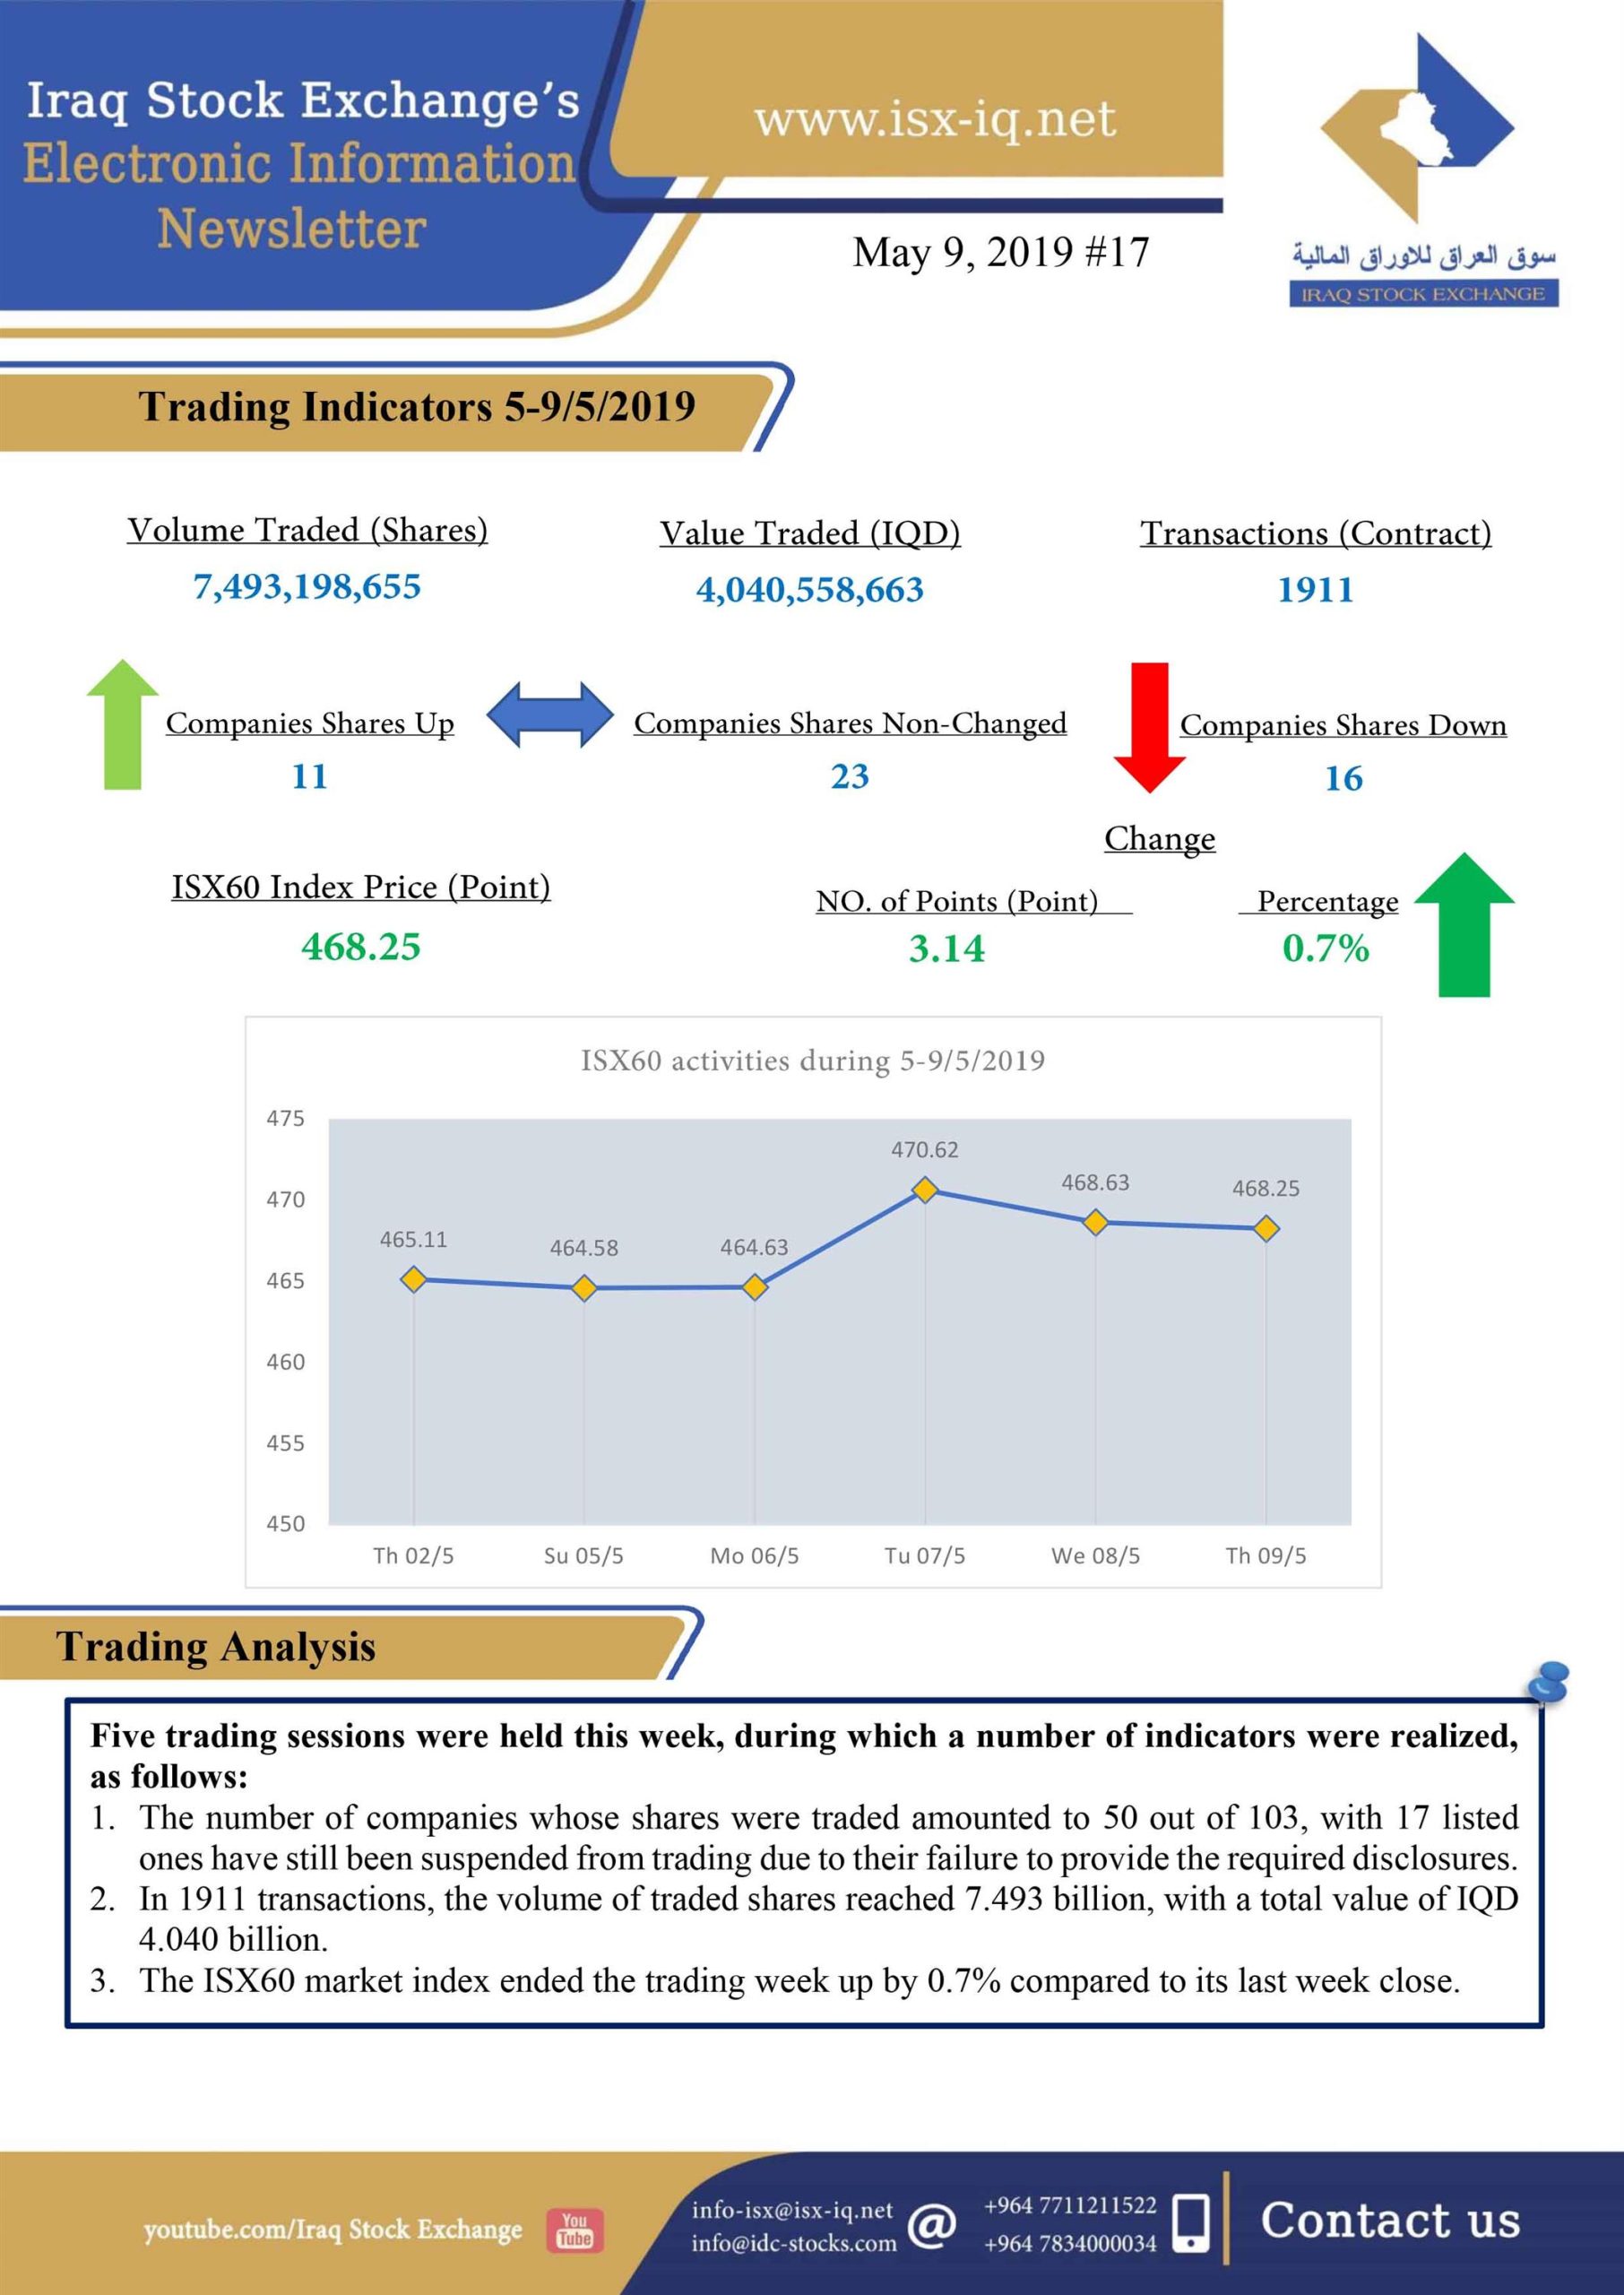 You are currently viewing Issue number 17 of (Iraq Stock Exchange’s Electronic Information weekly Newsletter)